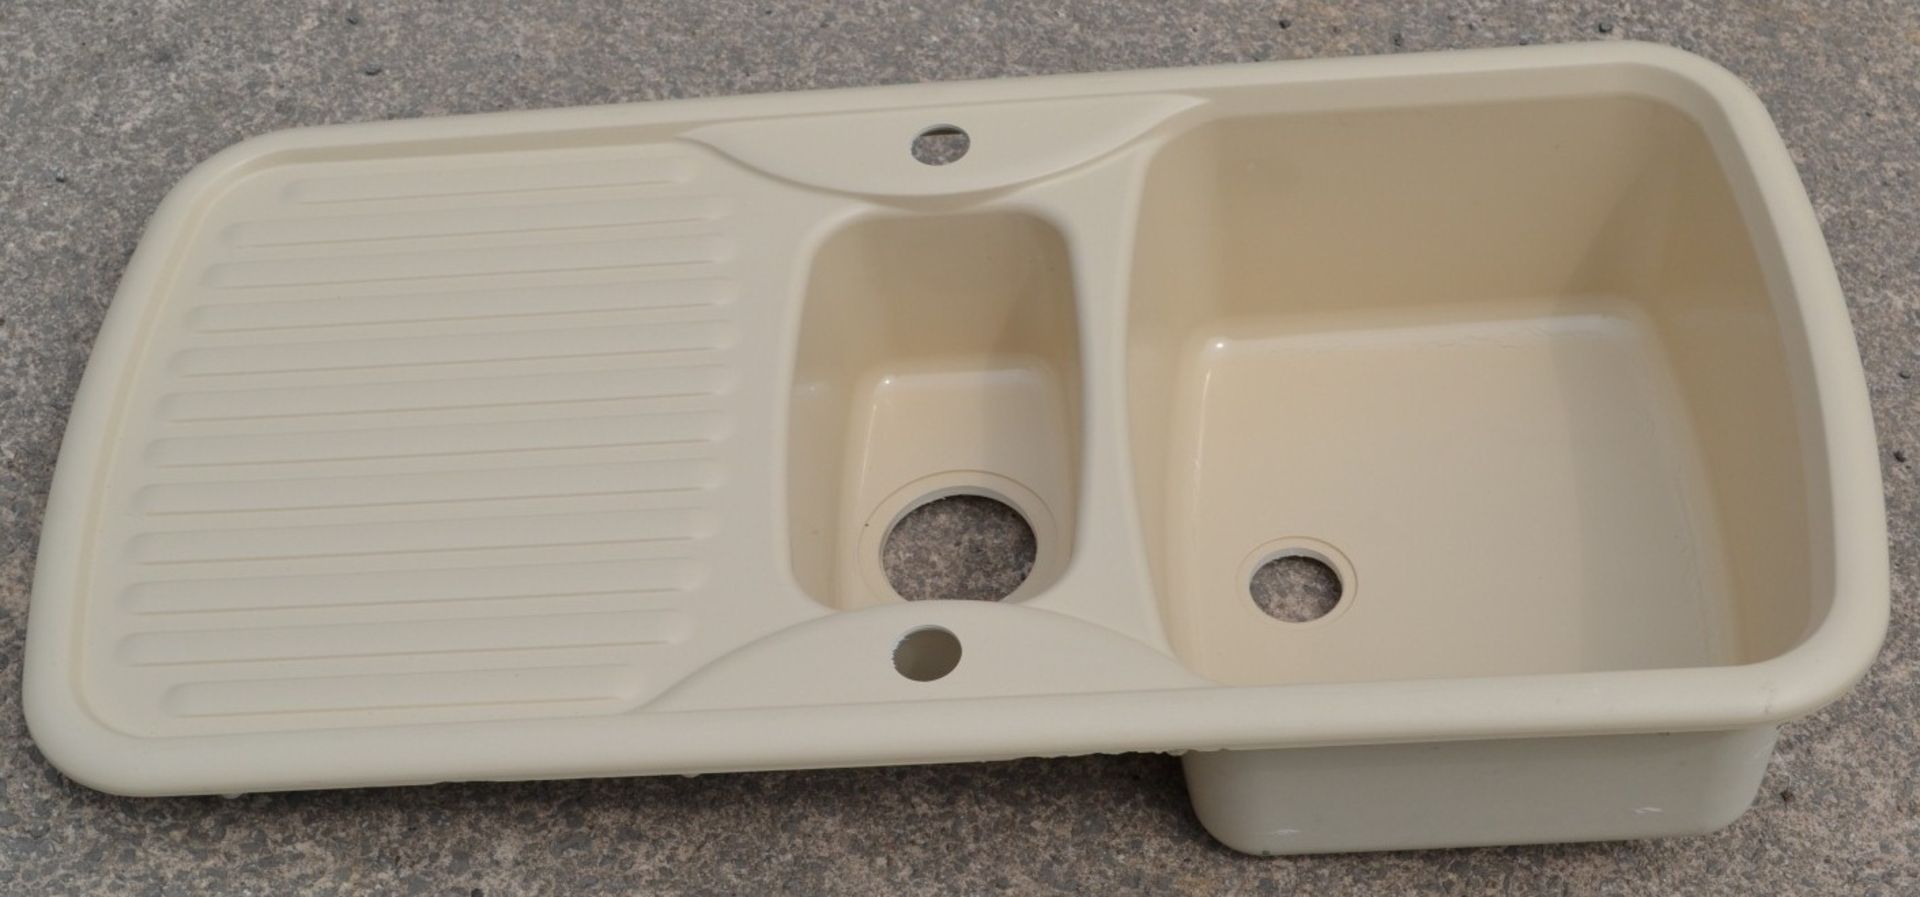 5 x Acrylic 1.5 Bowl Kitchen Sinks In Beige - New / Unused Stock - Dimensions: 97 x 49cm - Image 2 of 3